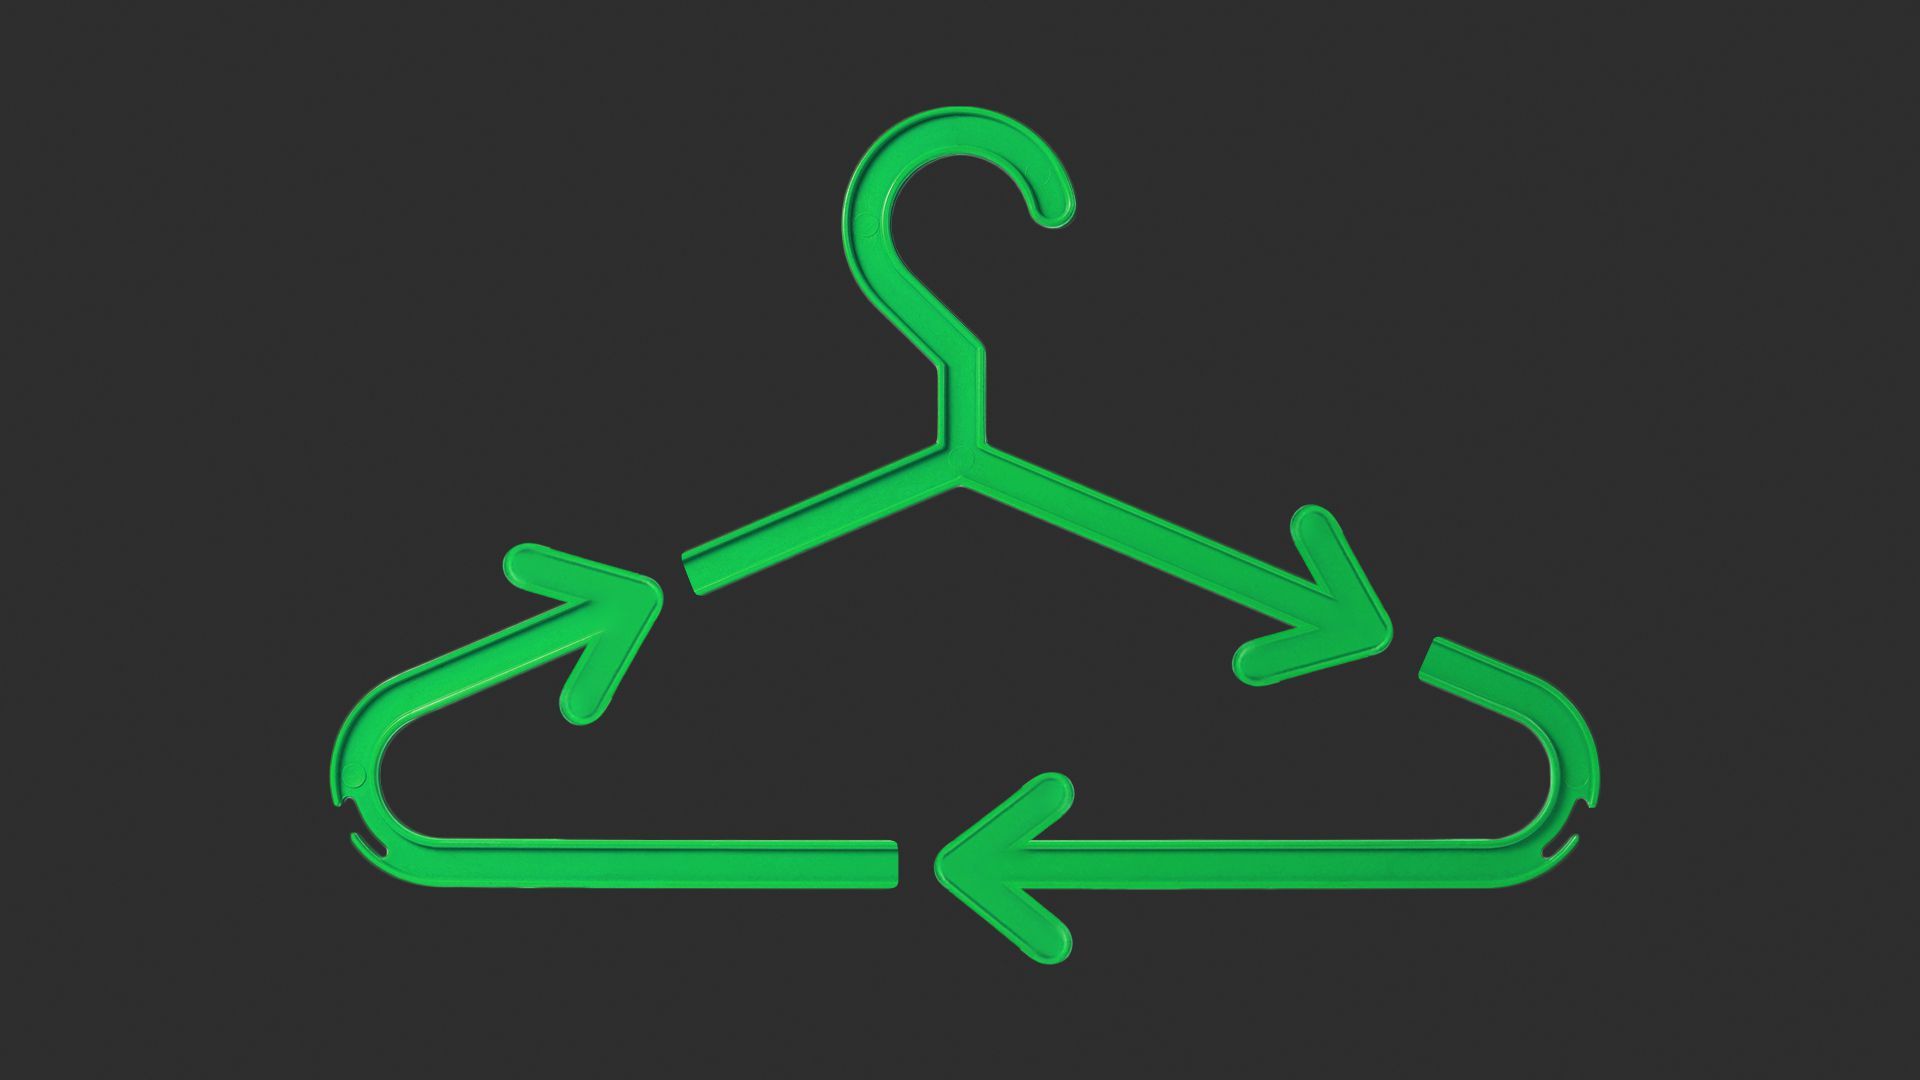 Illustration of a clothes hanger resembling a recycling icon